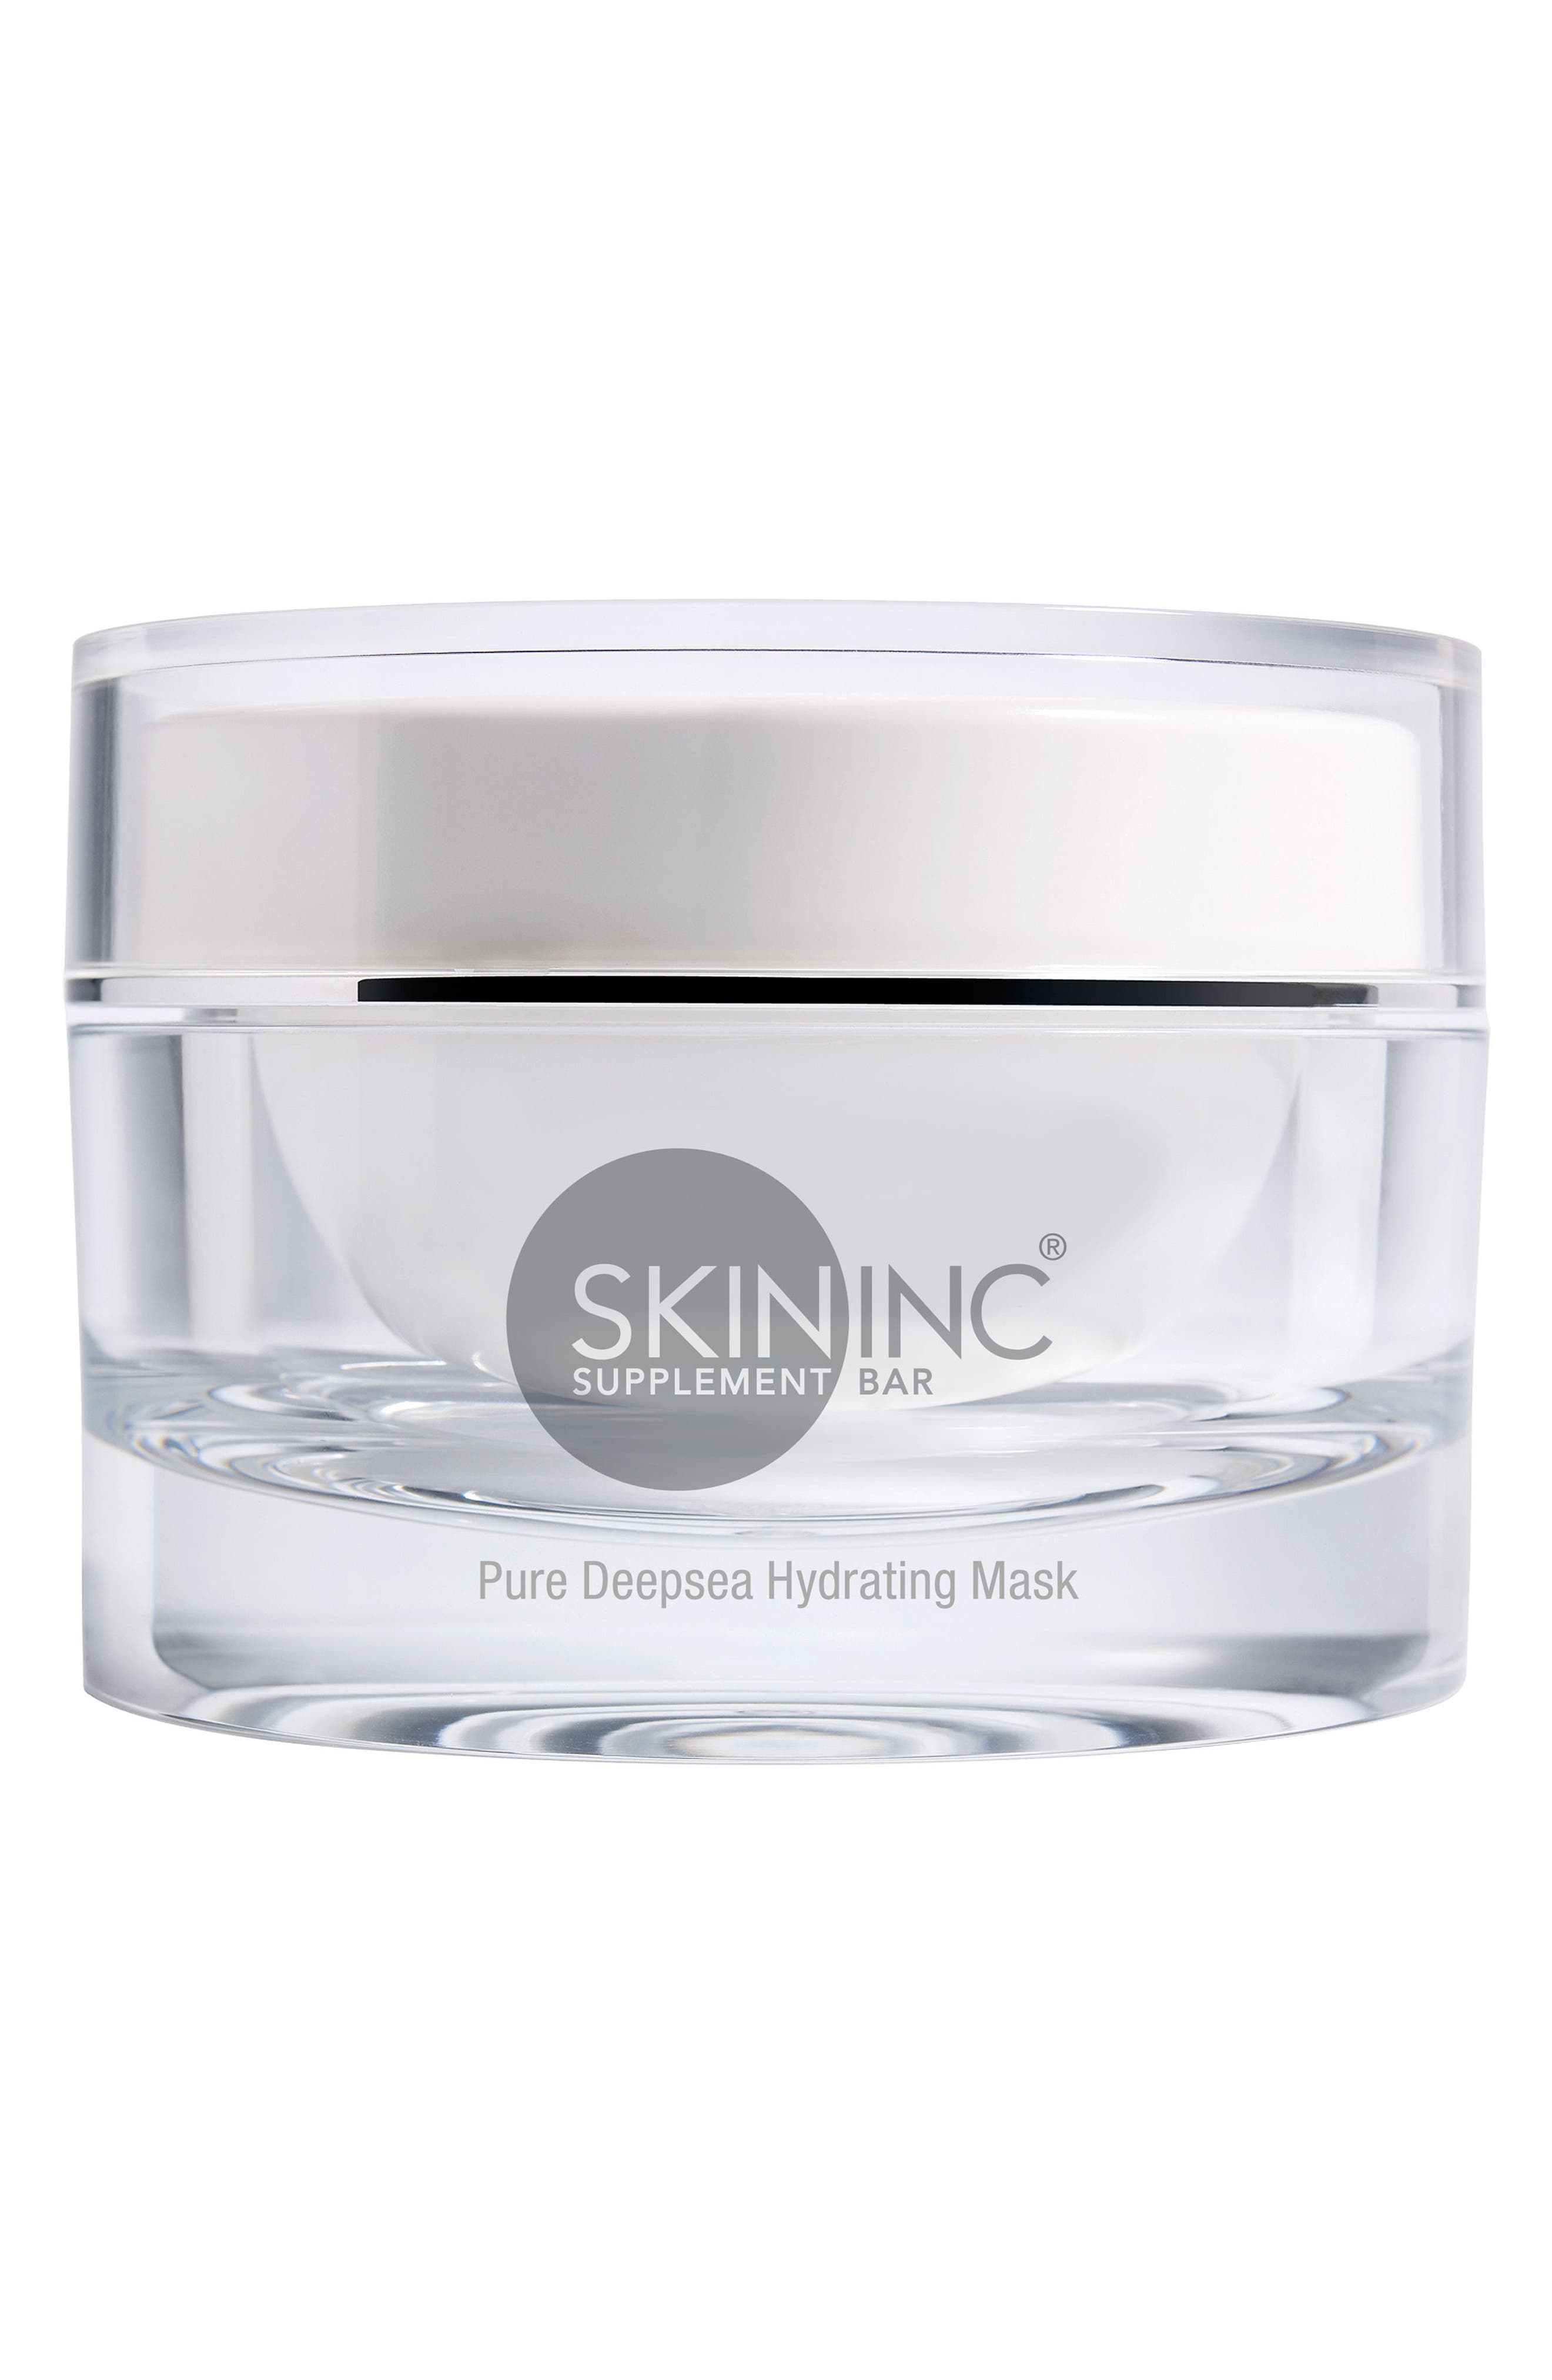 Skin Inc. Pure Deepsea Hydrating Mask at Nordstrom, Size 1 Oz